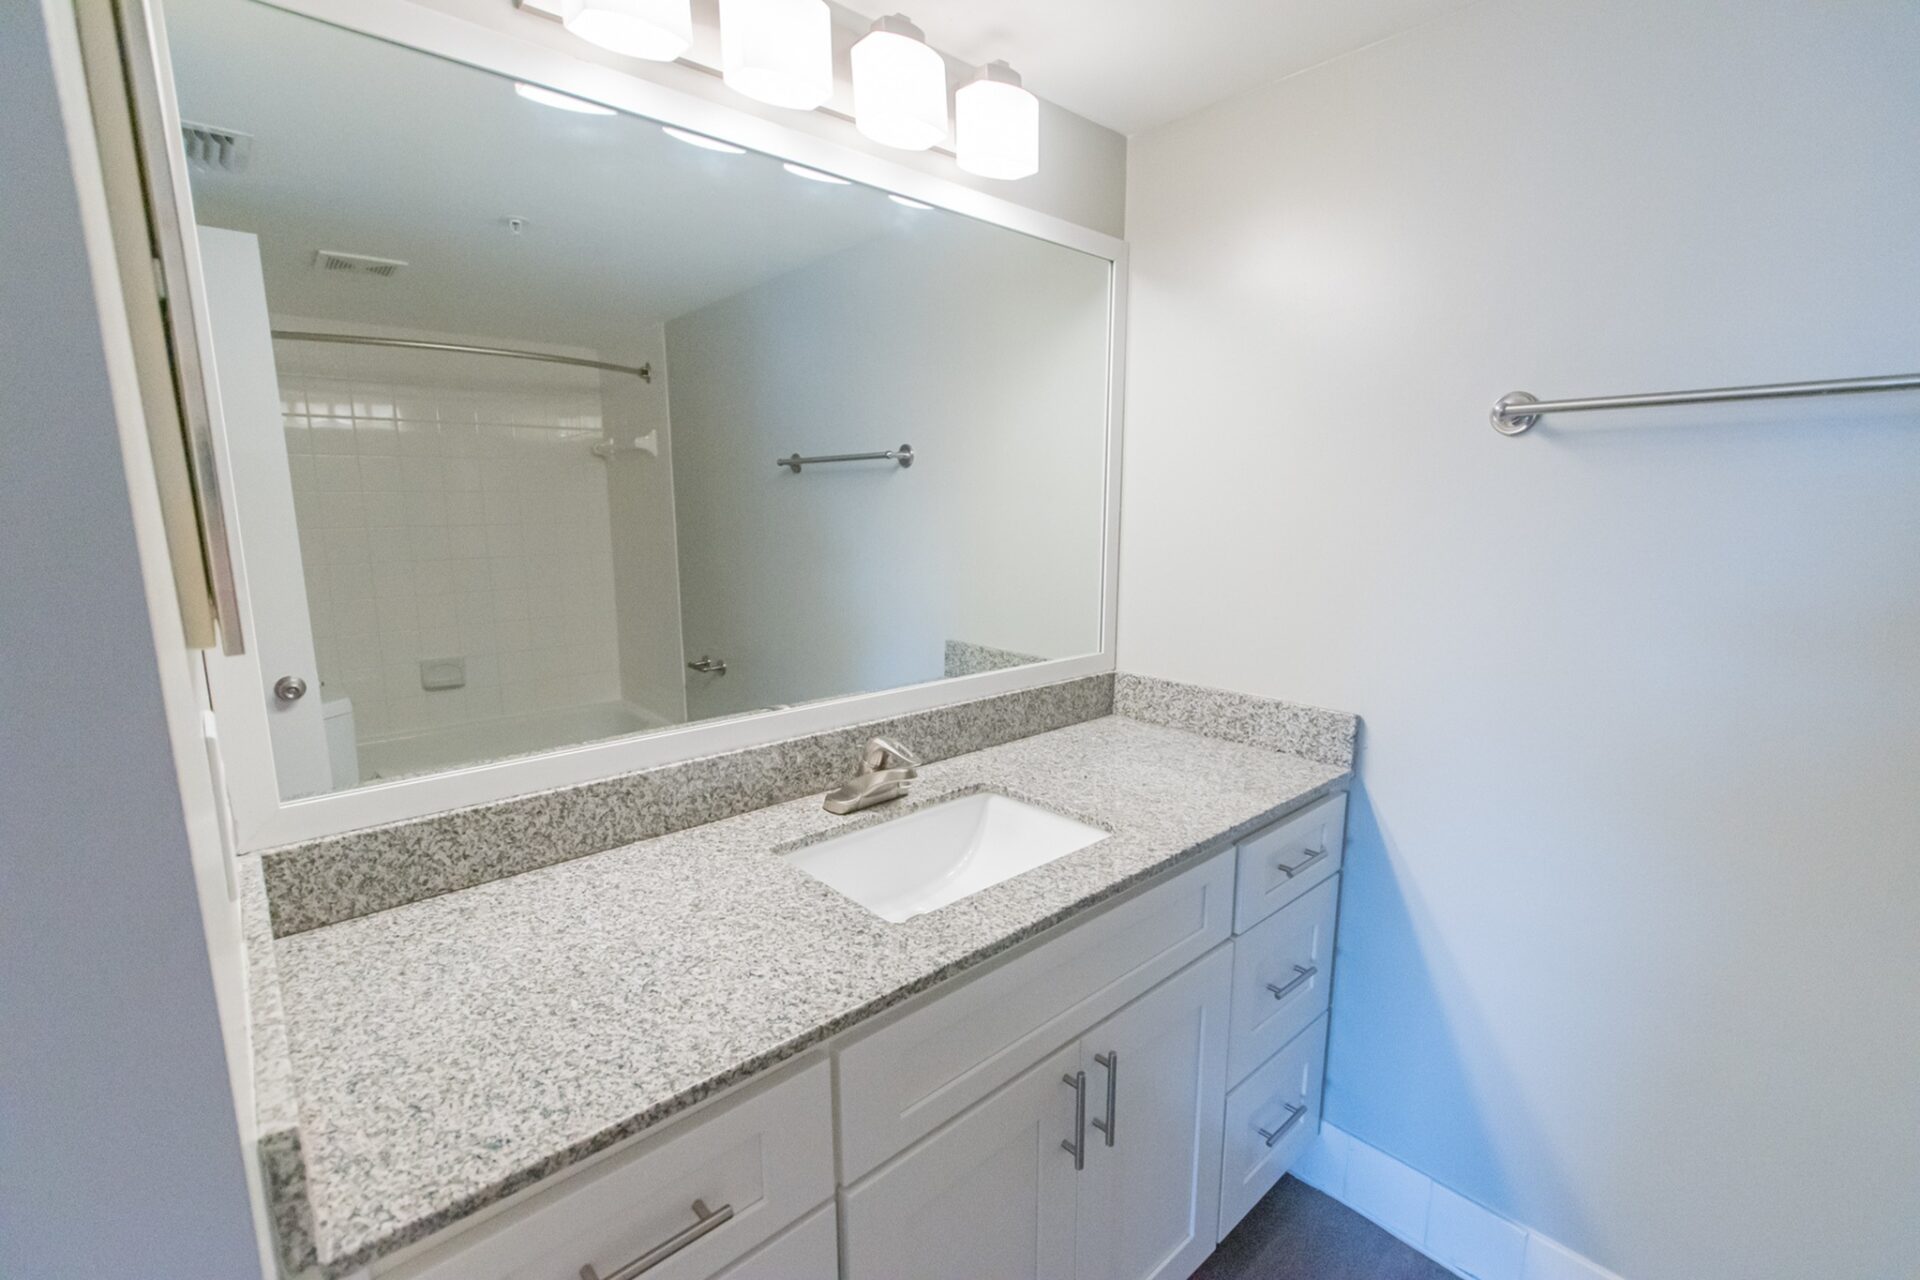 Bathroom with large mirrors and lots of countertop space.